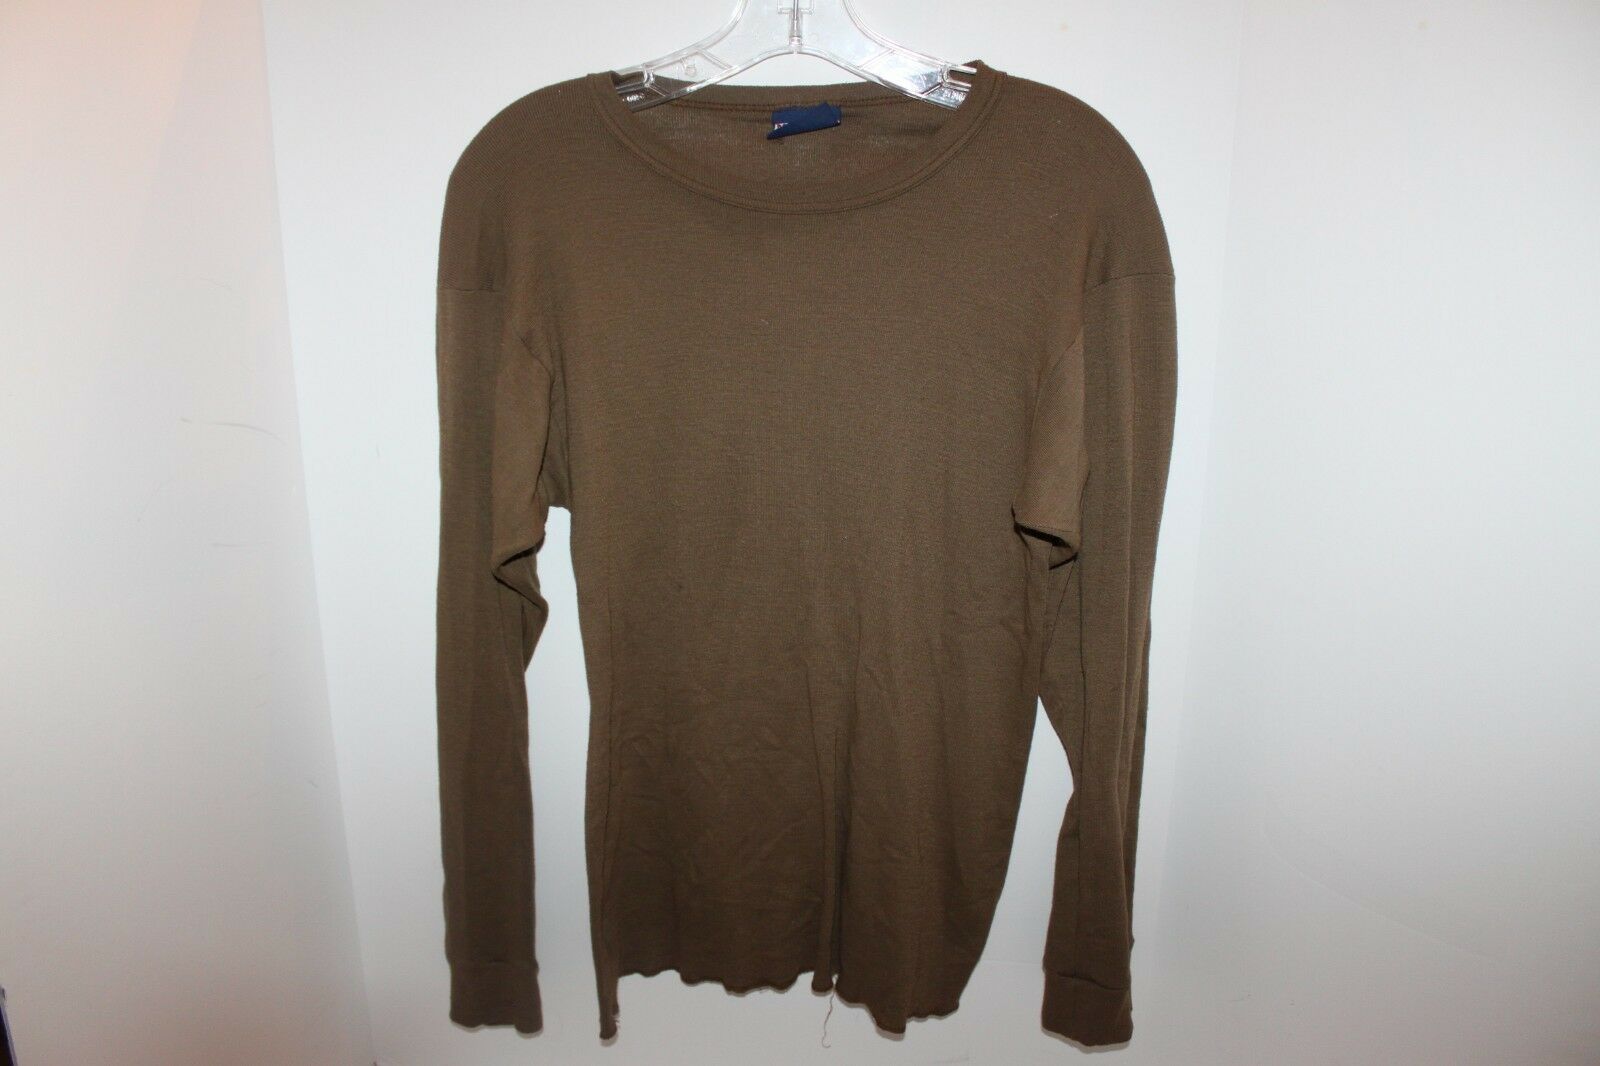 US Military Medalist Men's Long Sleeve Shirt Size Medium Brown Thermals Warm Top